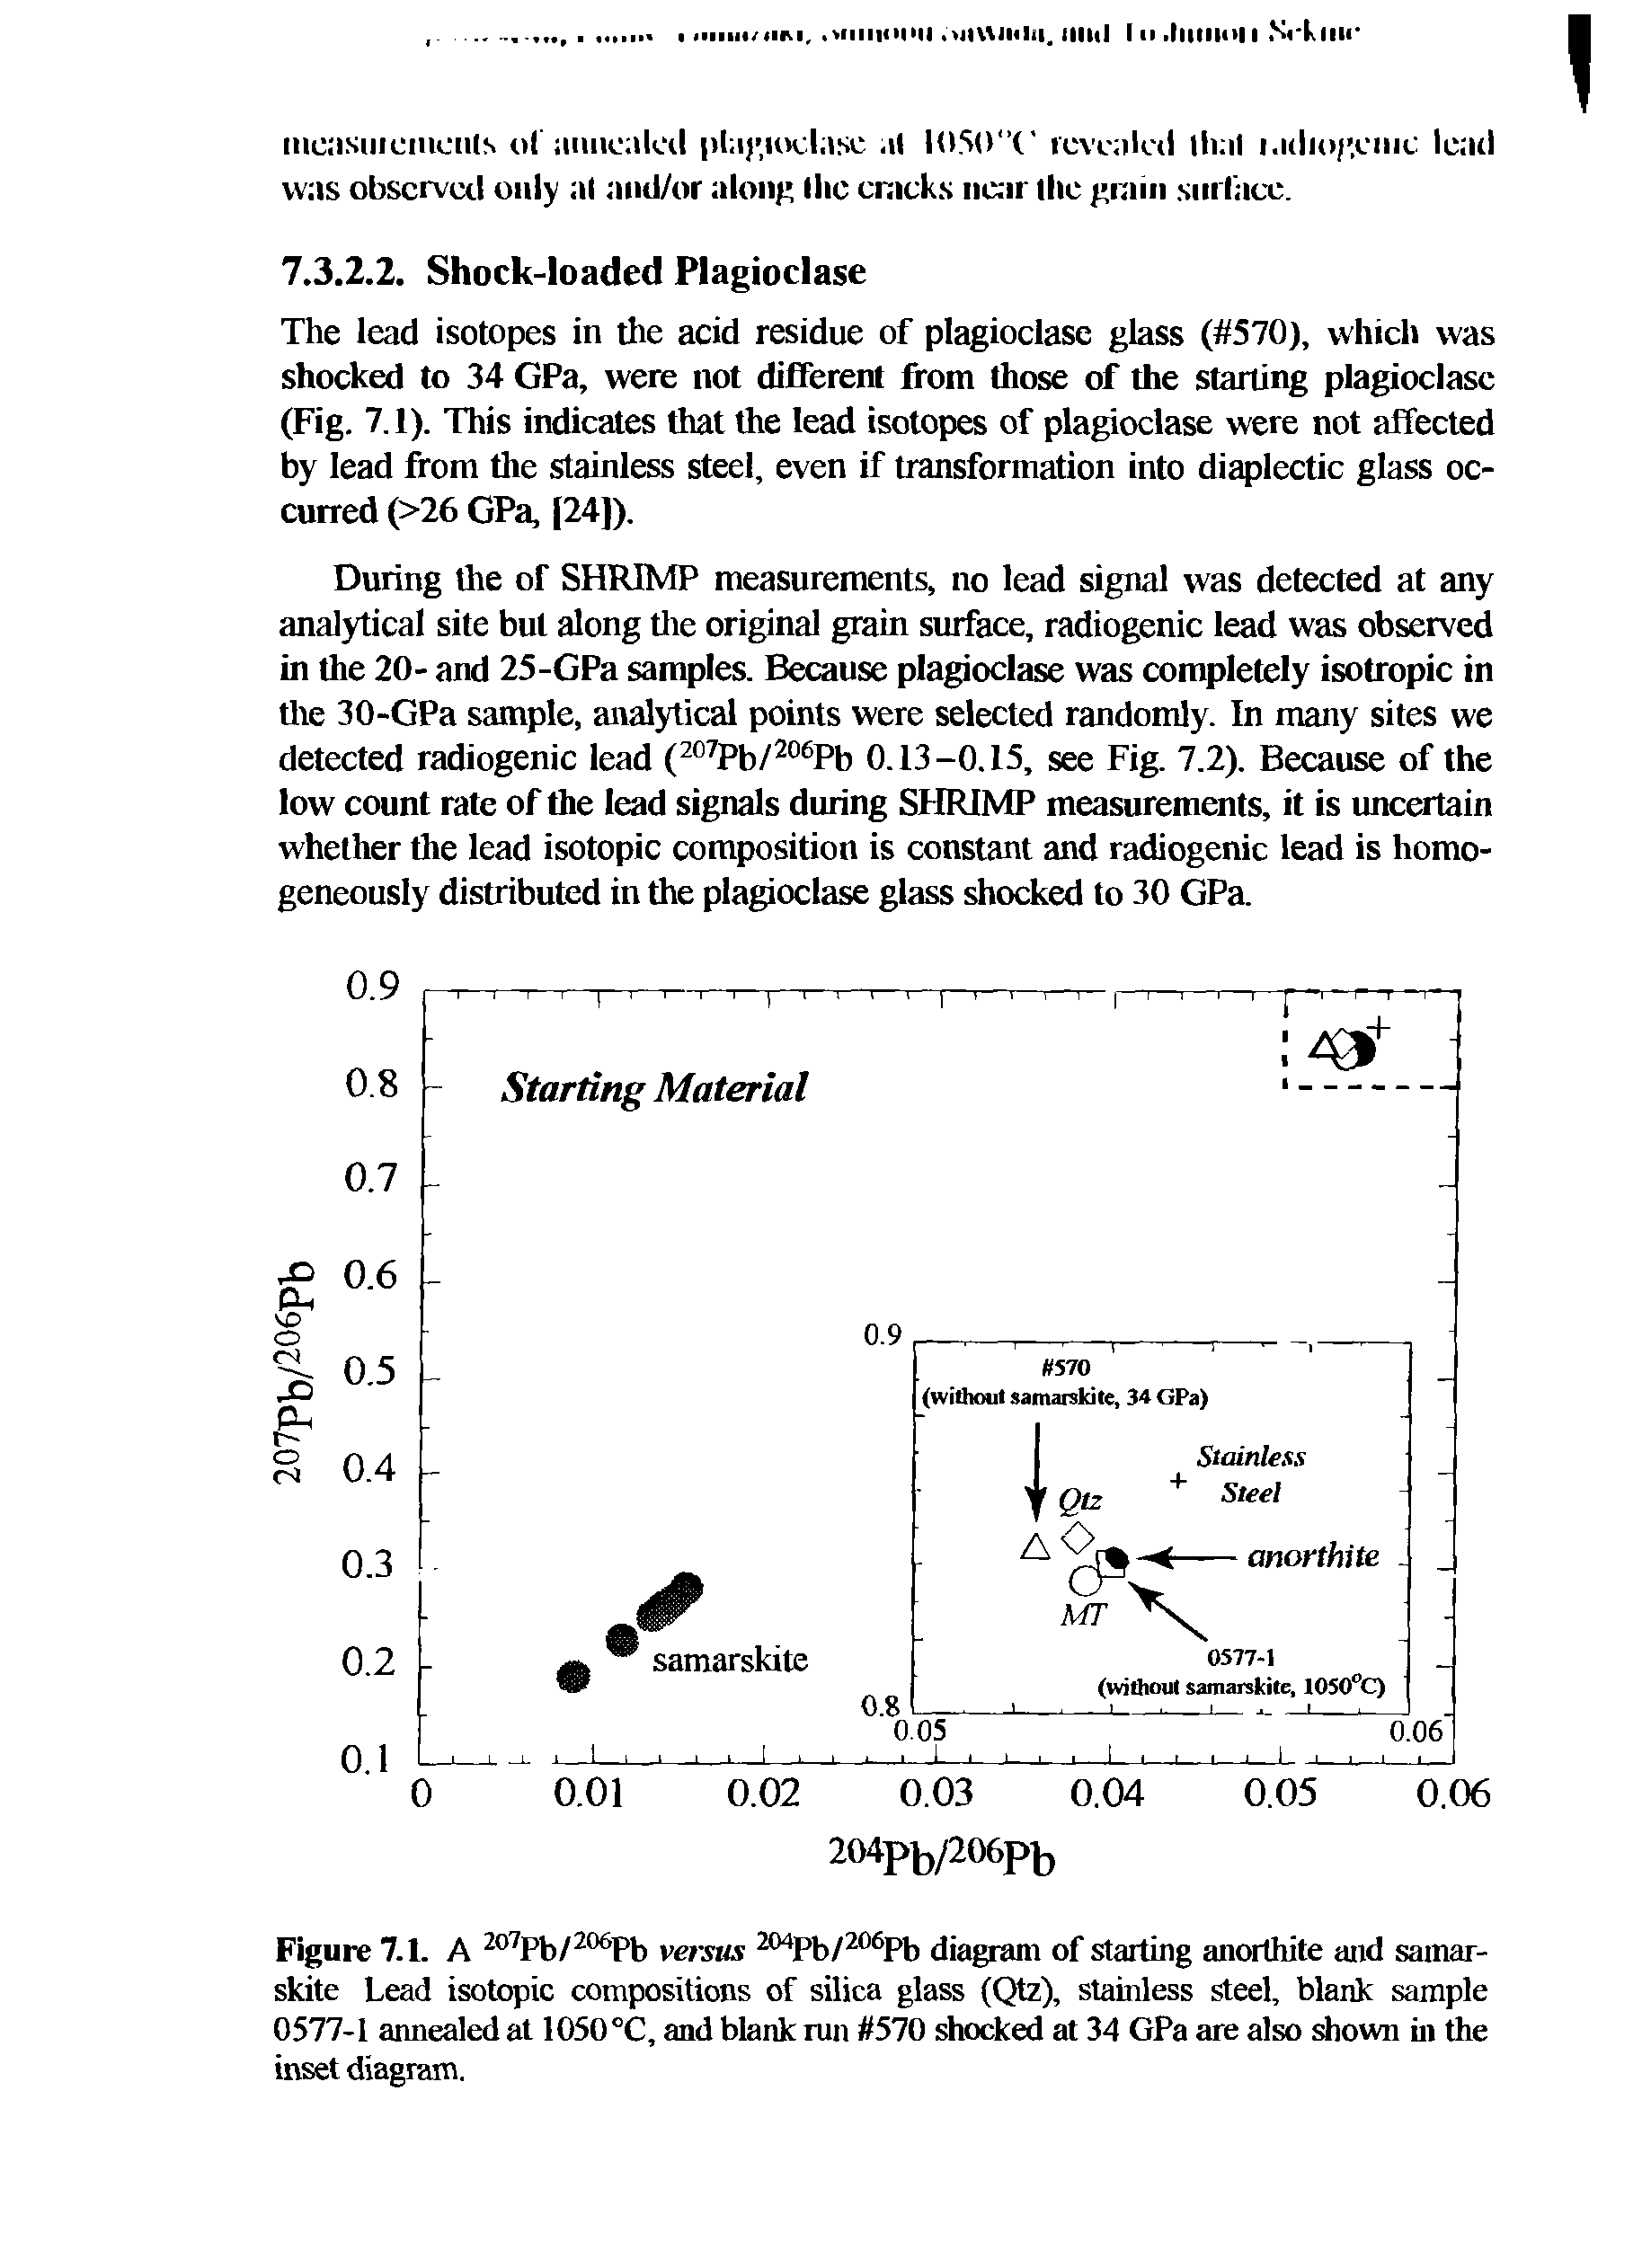 Figure 7.1. A ° Pb/ ° Pb versus Pb/ Pb diagram of starting anorthite and samarskite Lead isotopic compositions of silica glass (Qtz), stainless steel, blank sample 0577-1 annealed at 1050°C, and blank run 570 shocked at 34 GPa are also shown in the inset diagram.